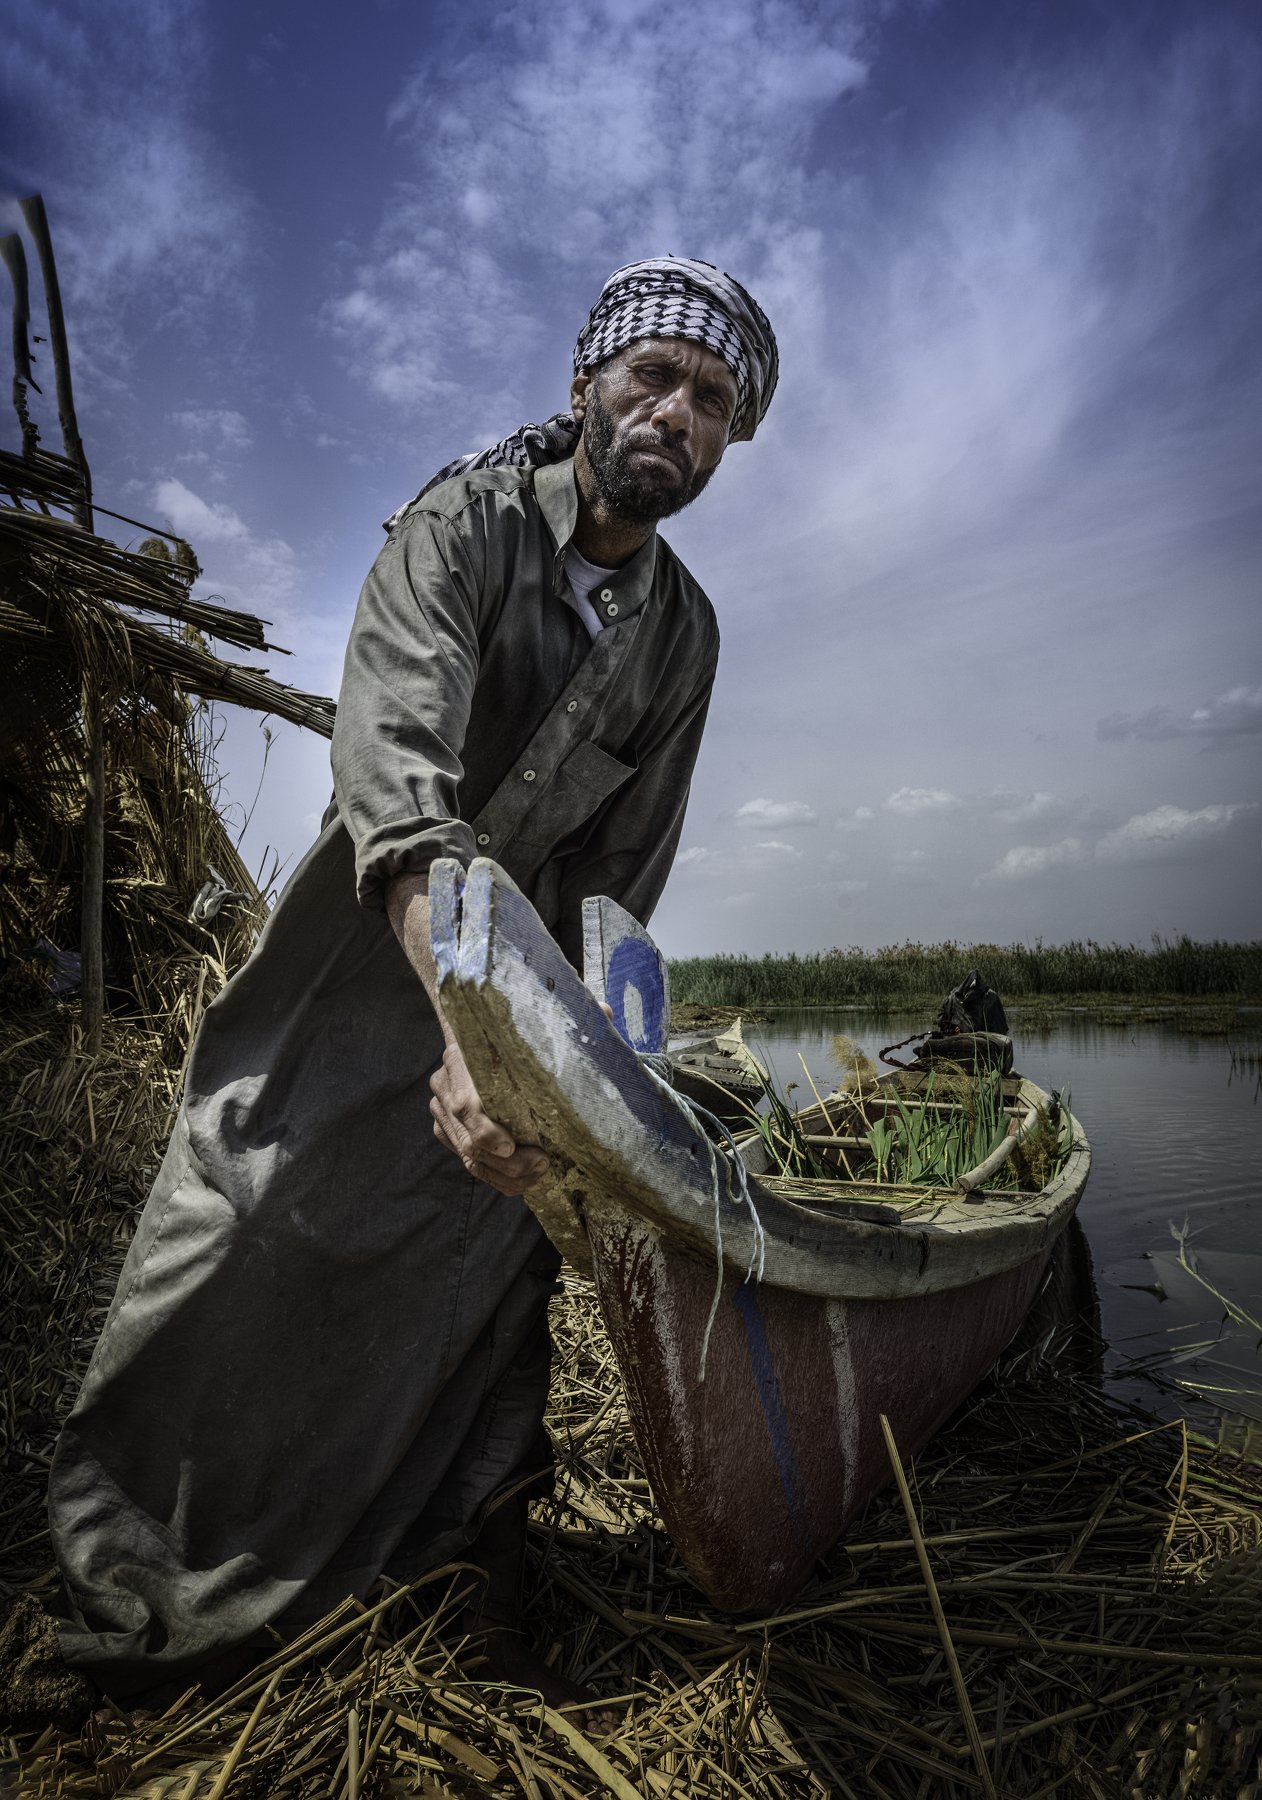 Marshes,Southern Iraq,Boy,cane,Water,sky, hussein